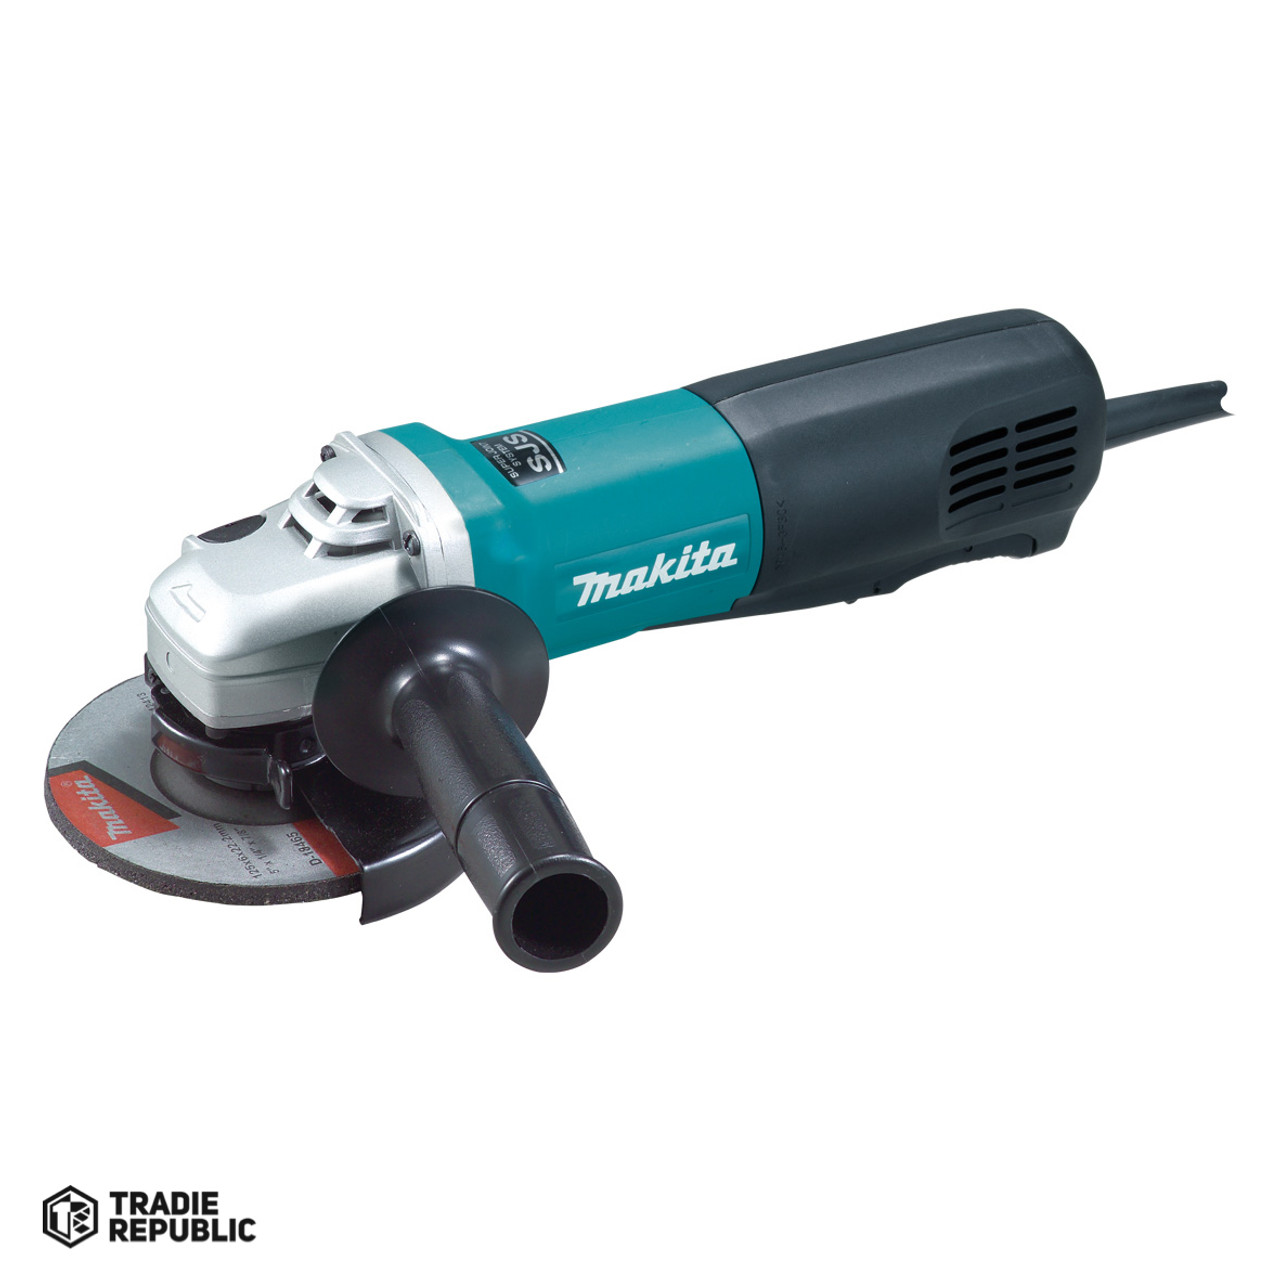 9565P Makita 125mm Paddle Switch Angle Grinder